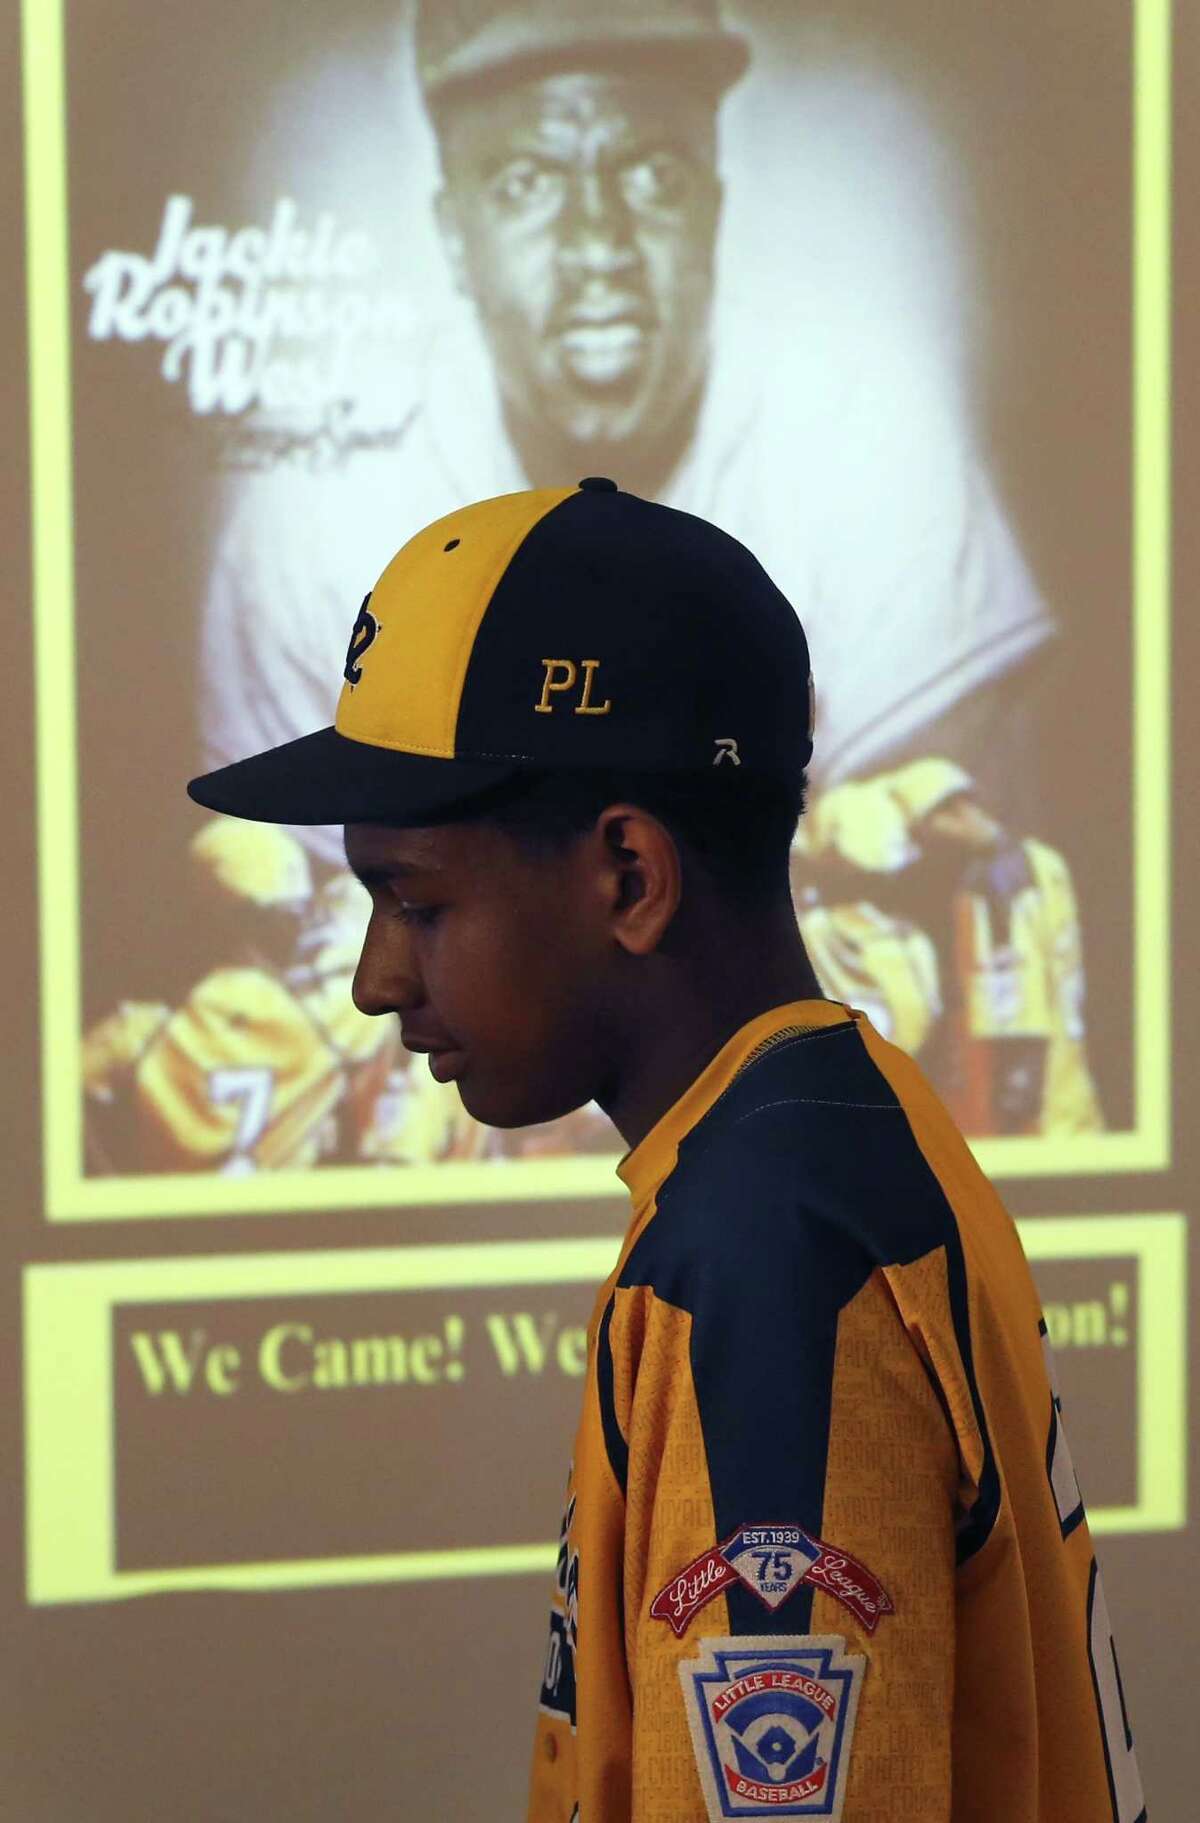 Jackie Robinson West Little League player Prentiss Luster walks past a projected image of Jackie Robinson after team attorney Victor Henderson addressed reporters at a news conference Wednesday in Chicago.